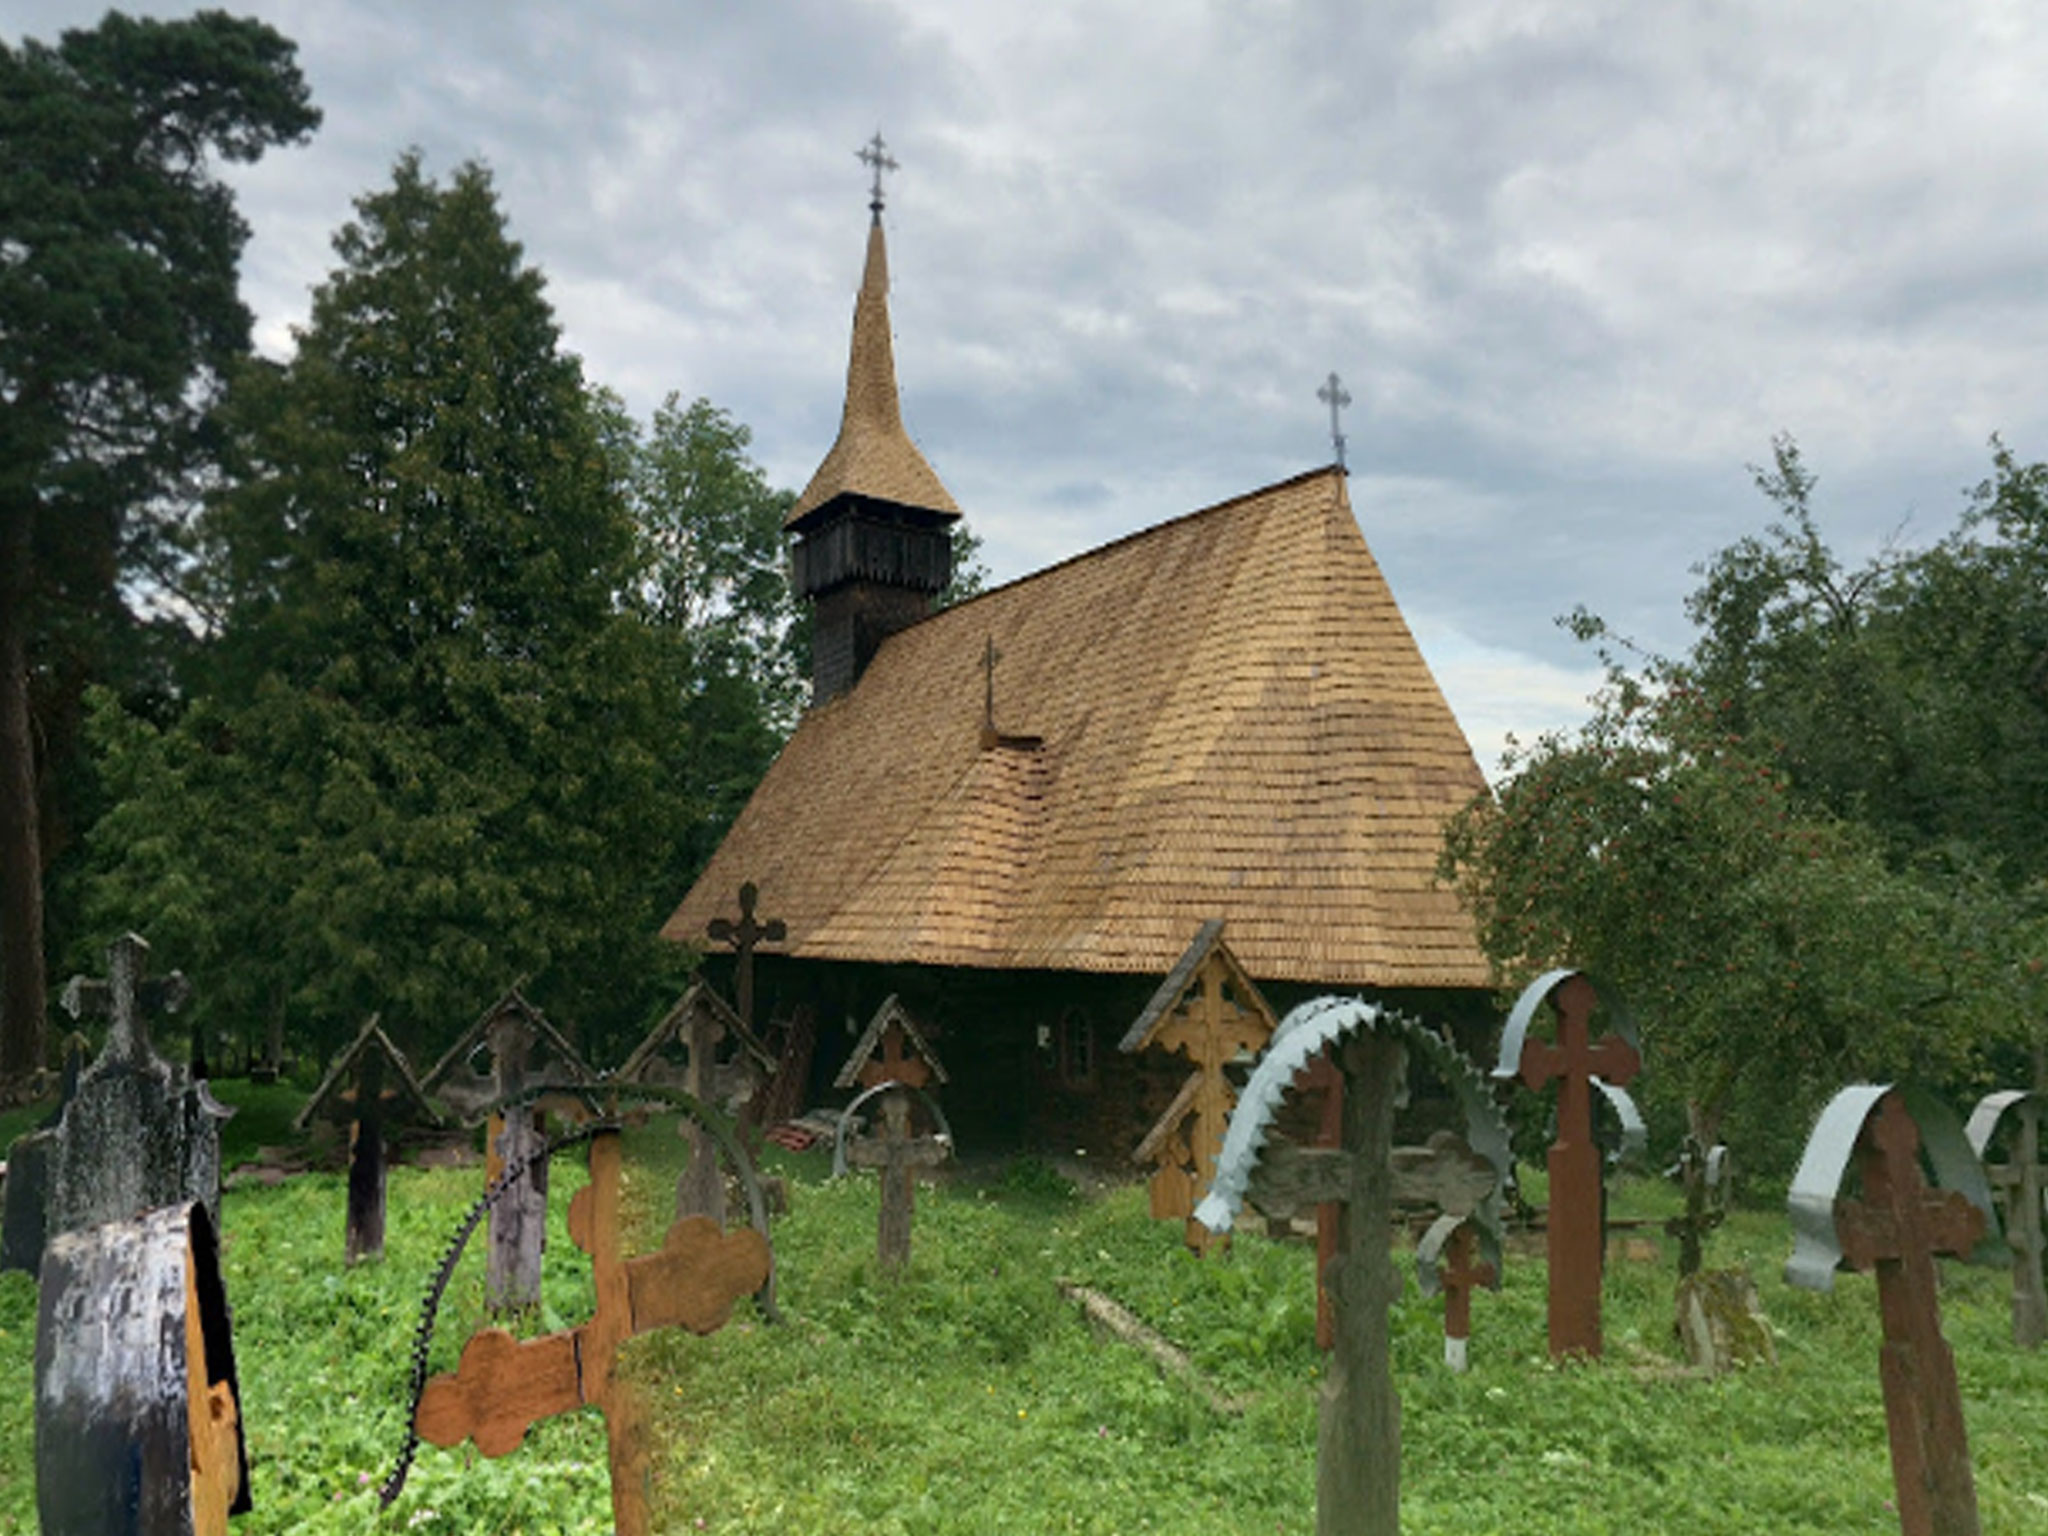 The wooden church in Breb, Romania, has been brought back to life